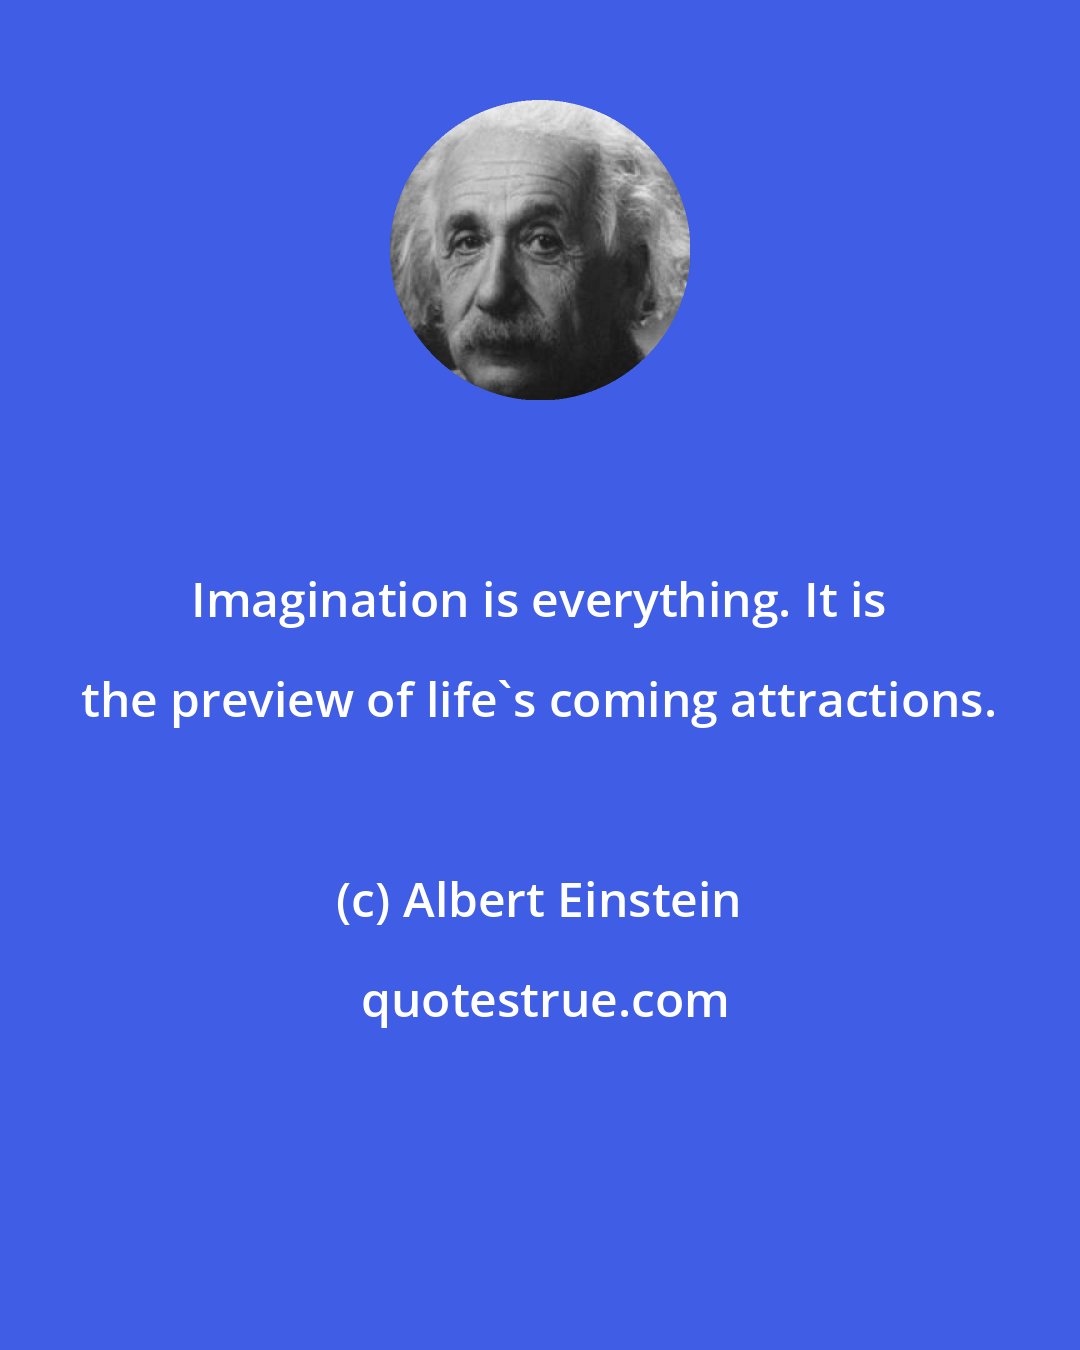 Albert Einstein: Imagination is everything. It is the preview of life's coming attractions.